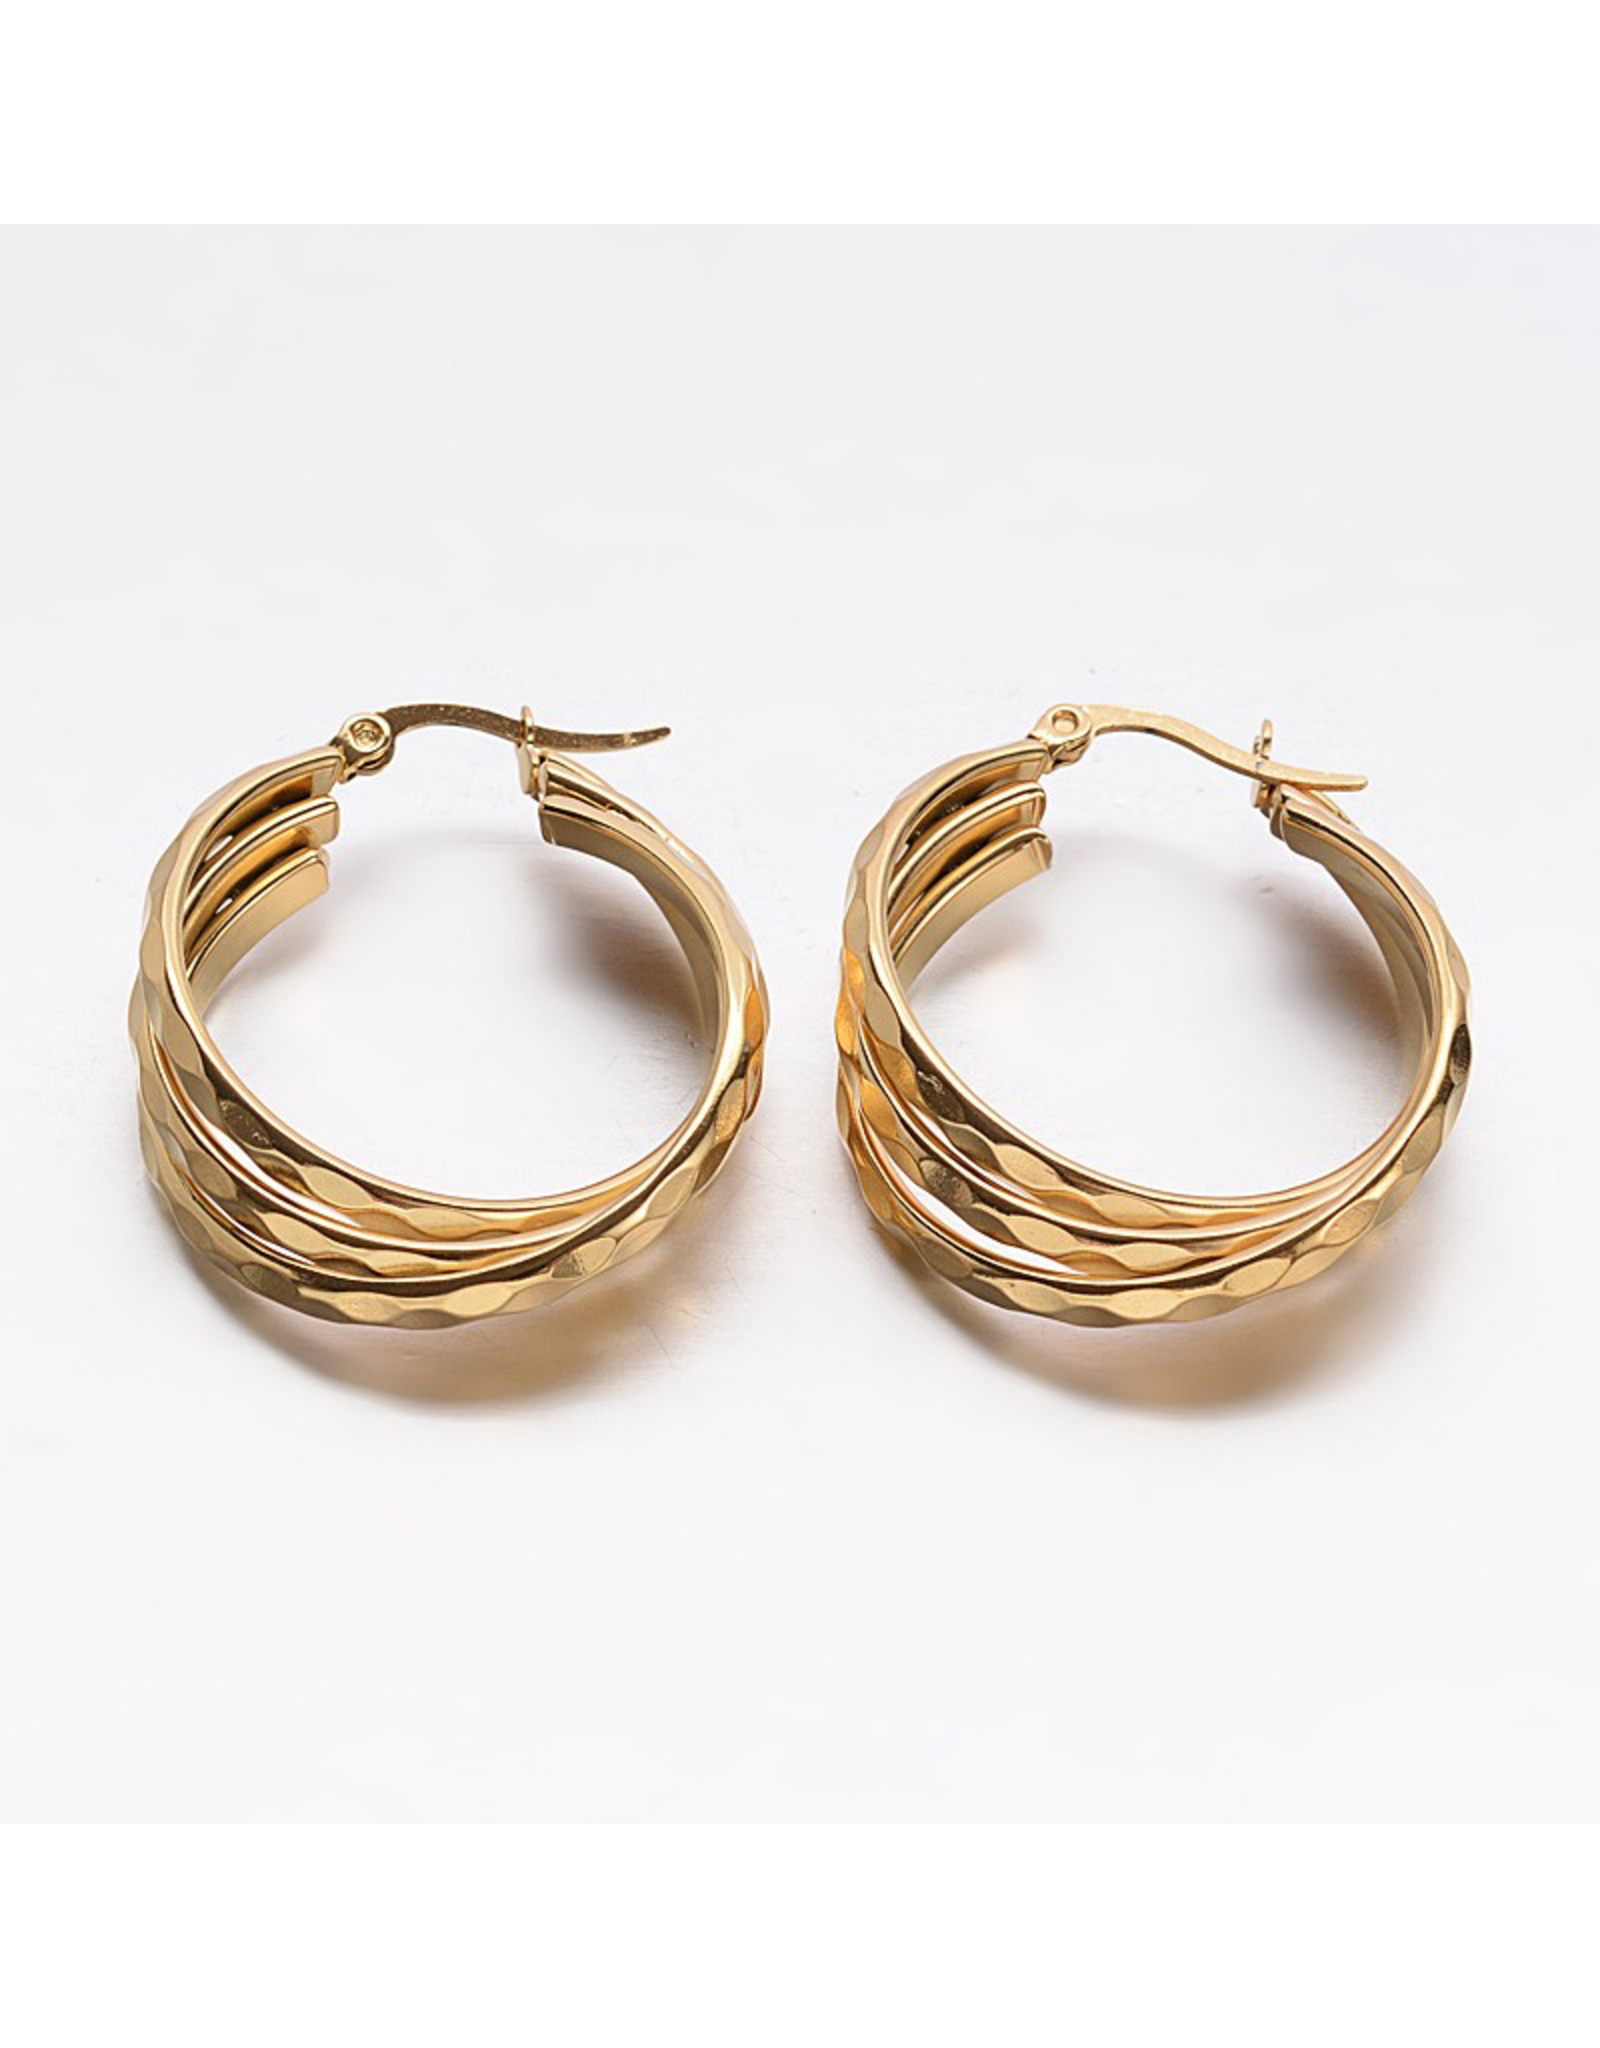 Fashion Jewelry *GOLD STAINLESS HOOP EARRINGS FJE41